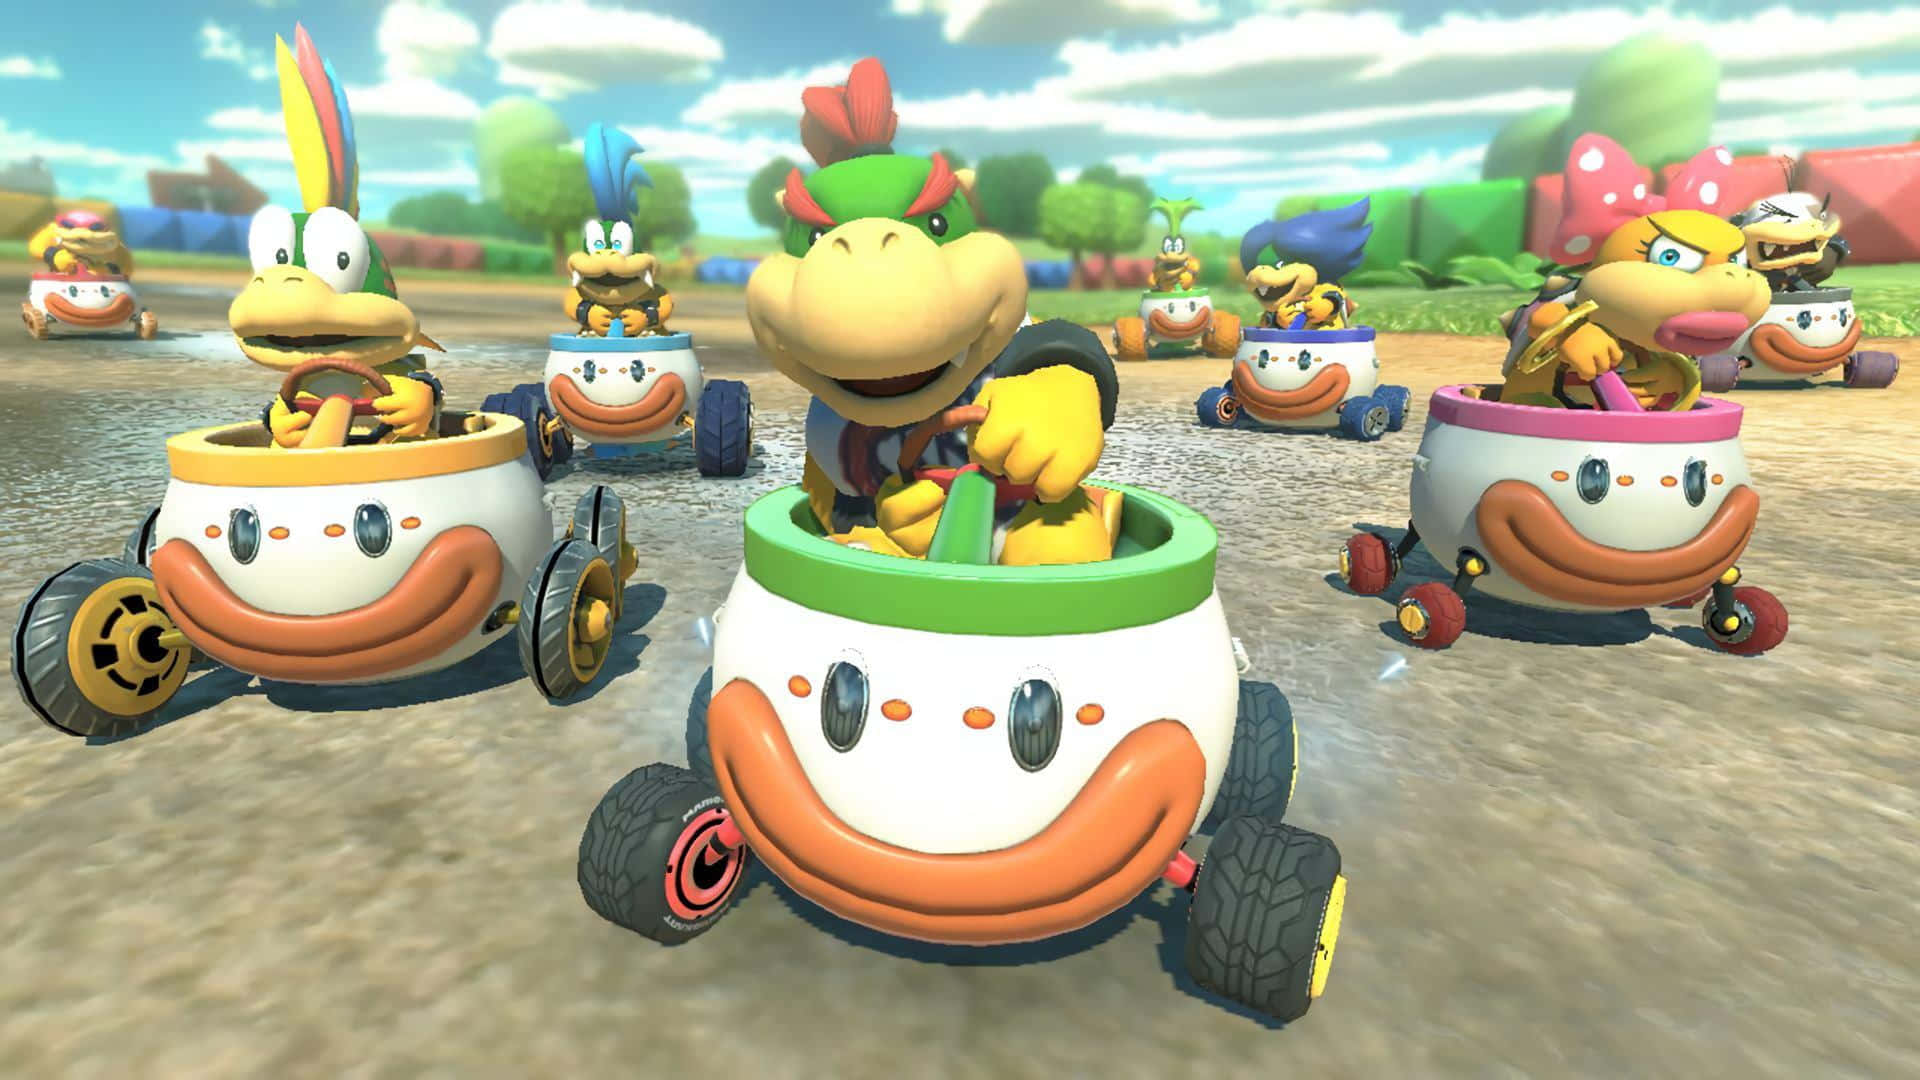 Bowser Jr. in action on a colorful background Wallpaper